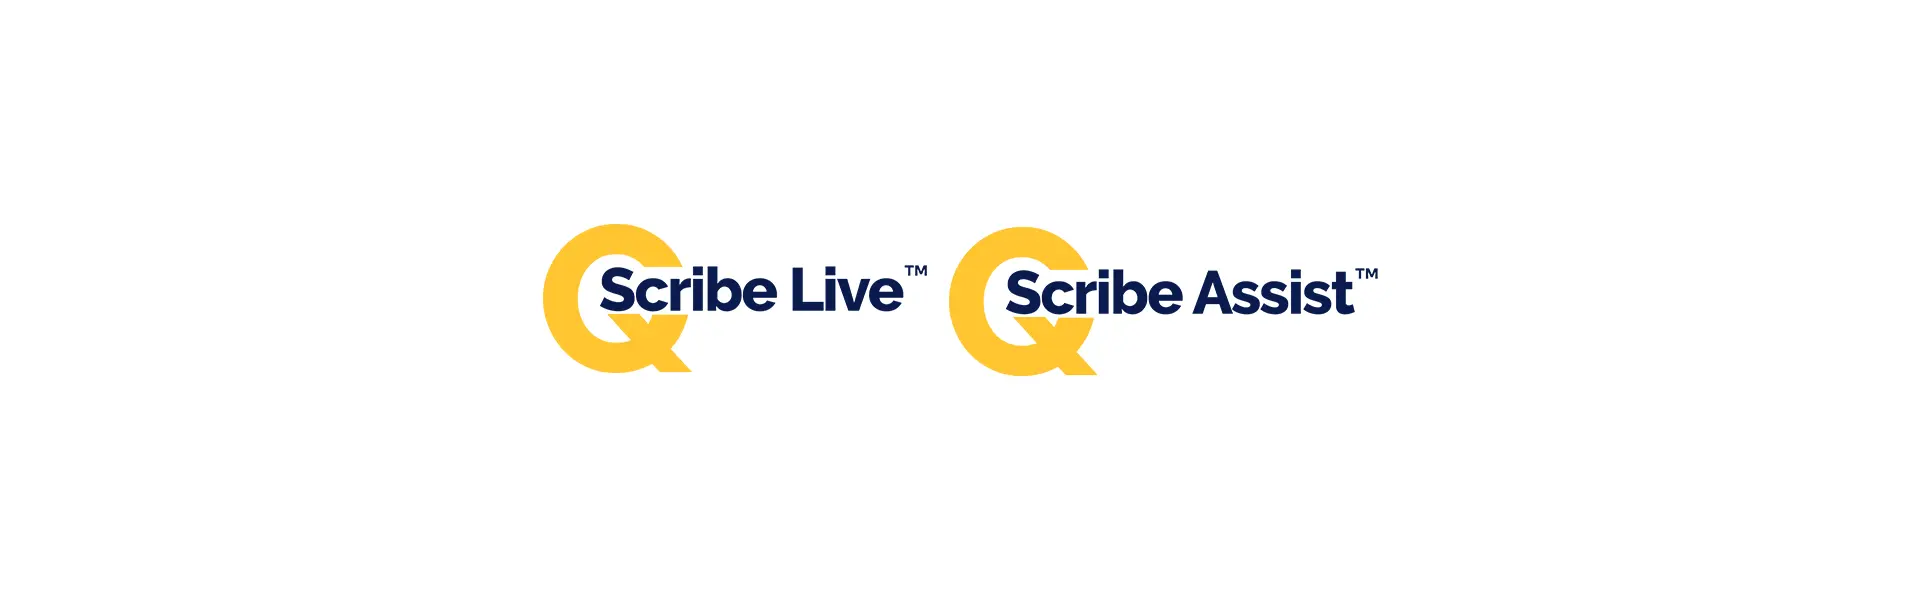 scribe assist and scribe live